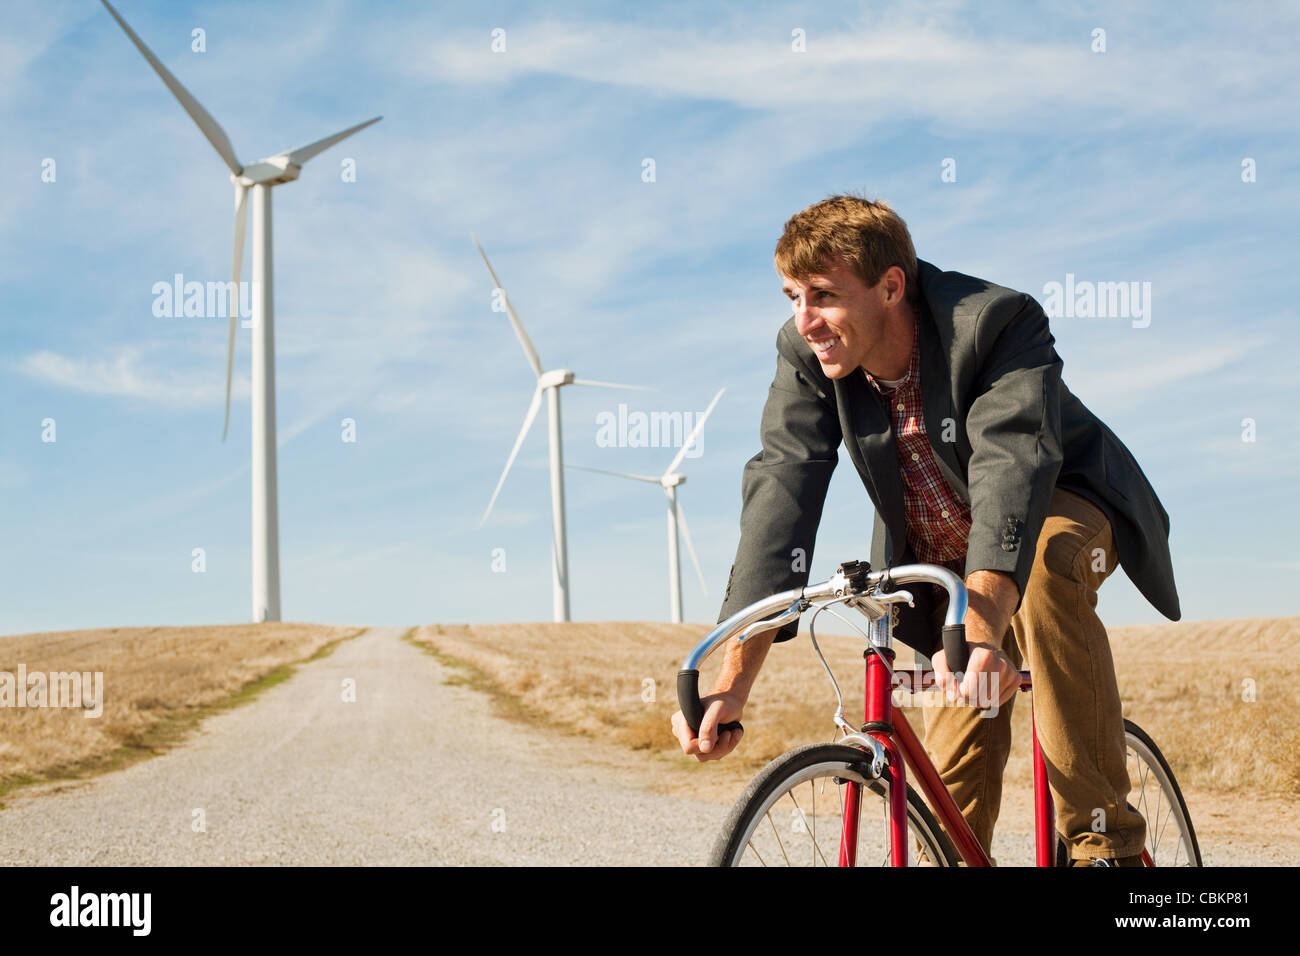 Man on bicycle in front of wind turbines Stock Photo